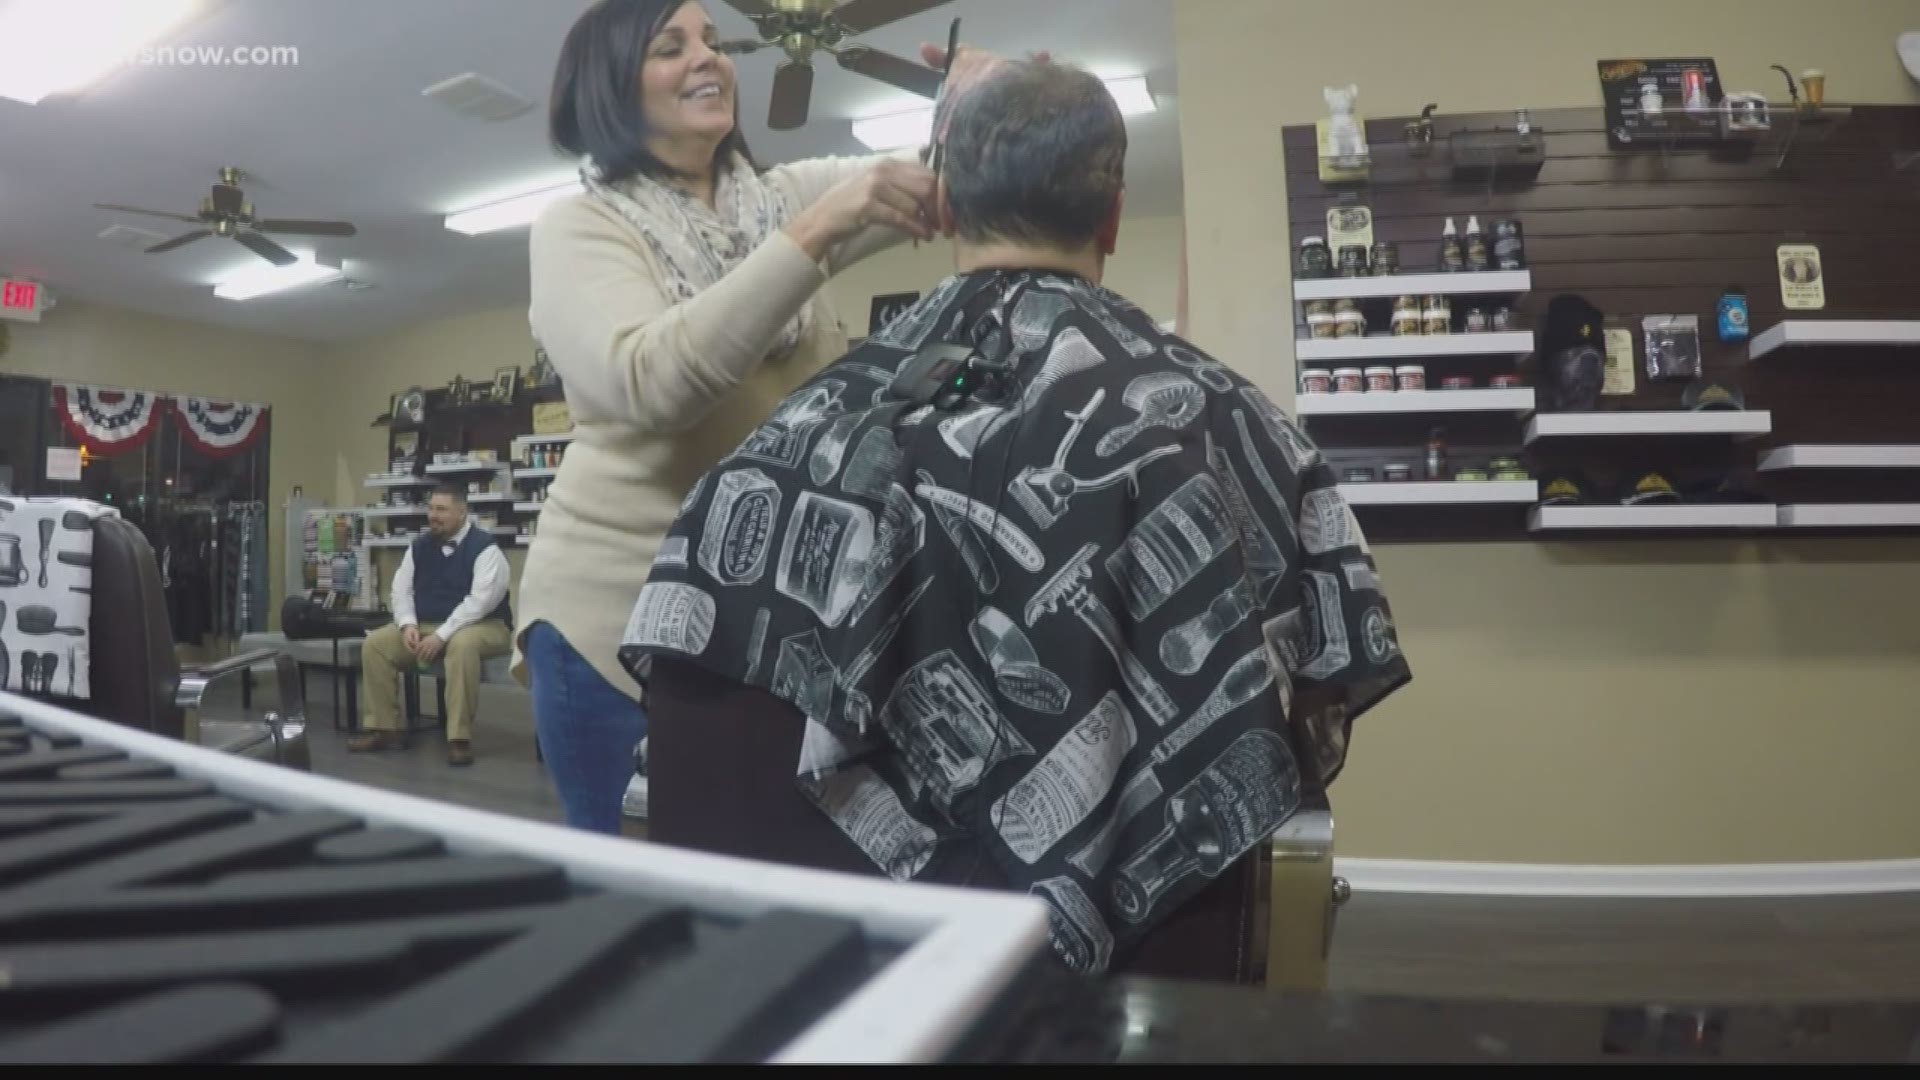 A Yorktown woman is giving furloughed workers, including military members, free hair cuts.